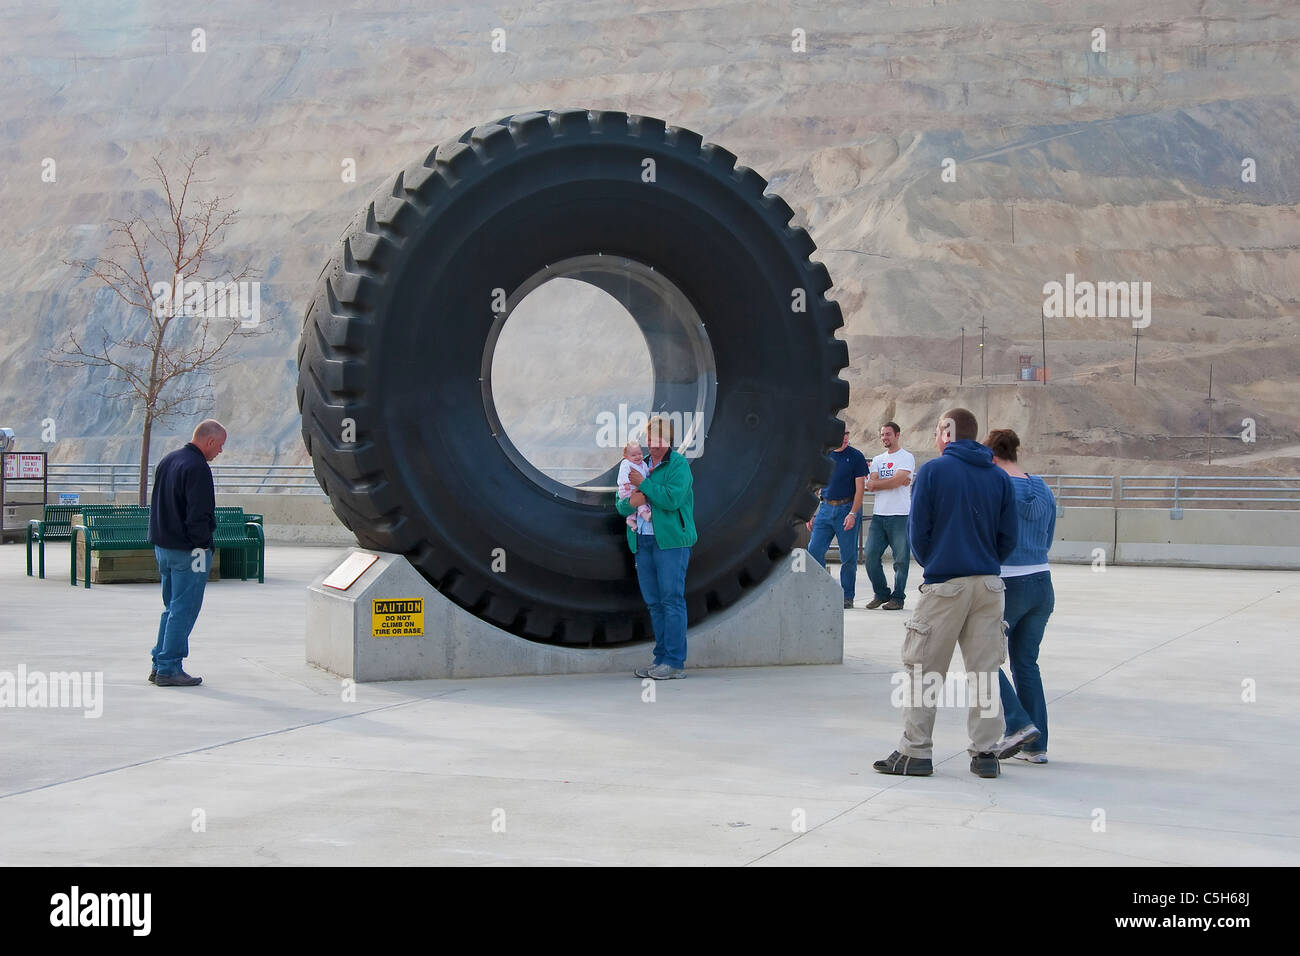 Here, a monstrous haulage truck tire is on display, near the Copper Mine's visitor center Stock Photo